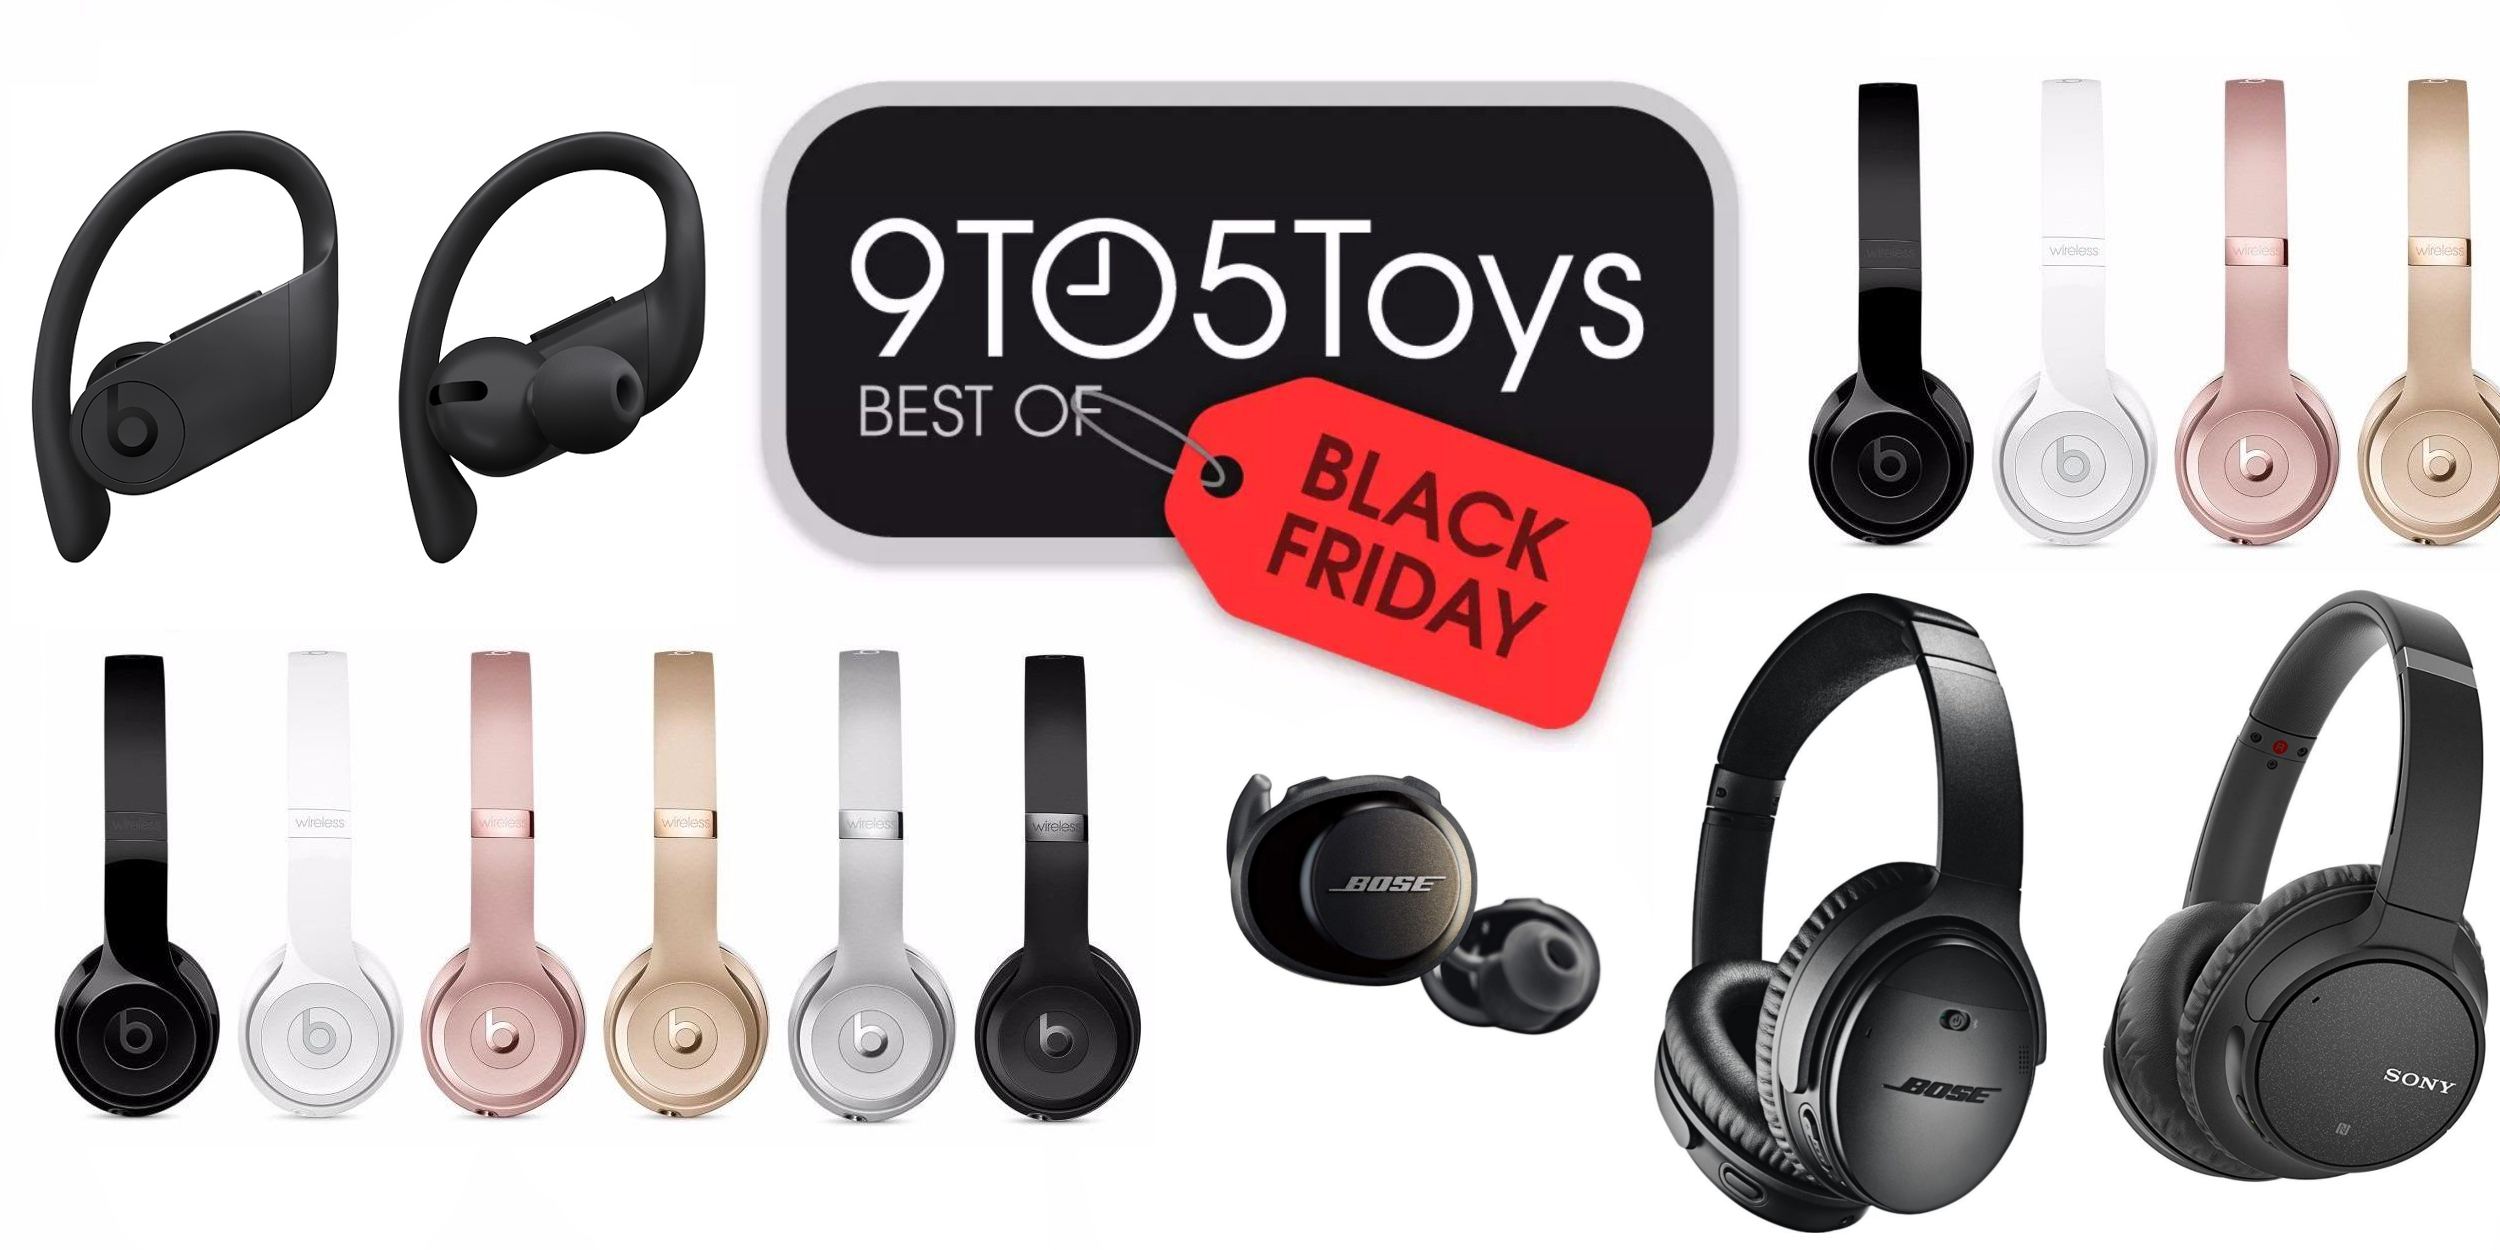 Best Black Friday headphones deals from Beats, Bose, more - 9to5Toys - What Is The Price Of Beats On Black Friday